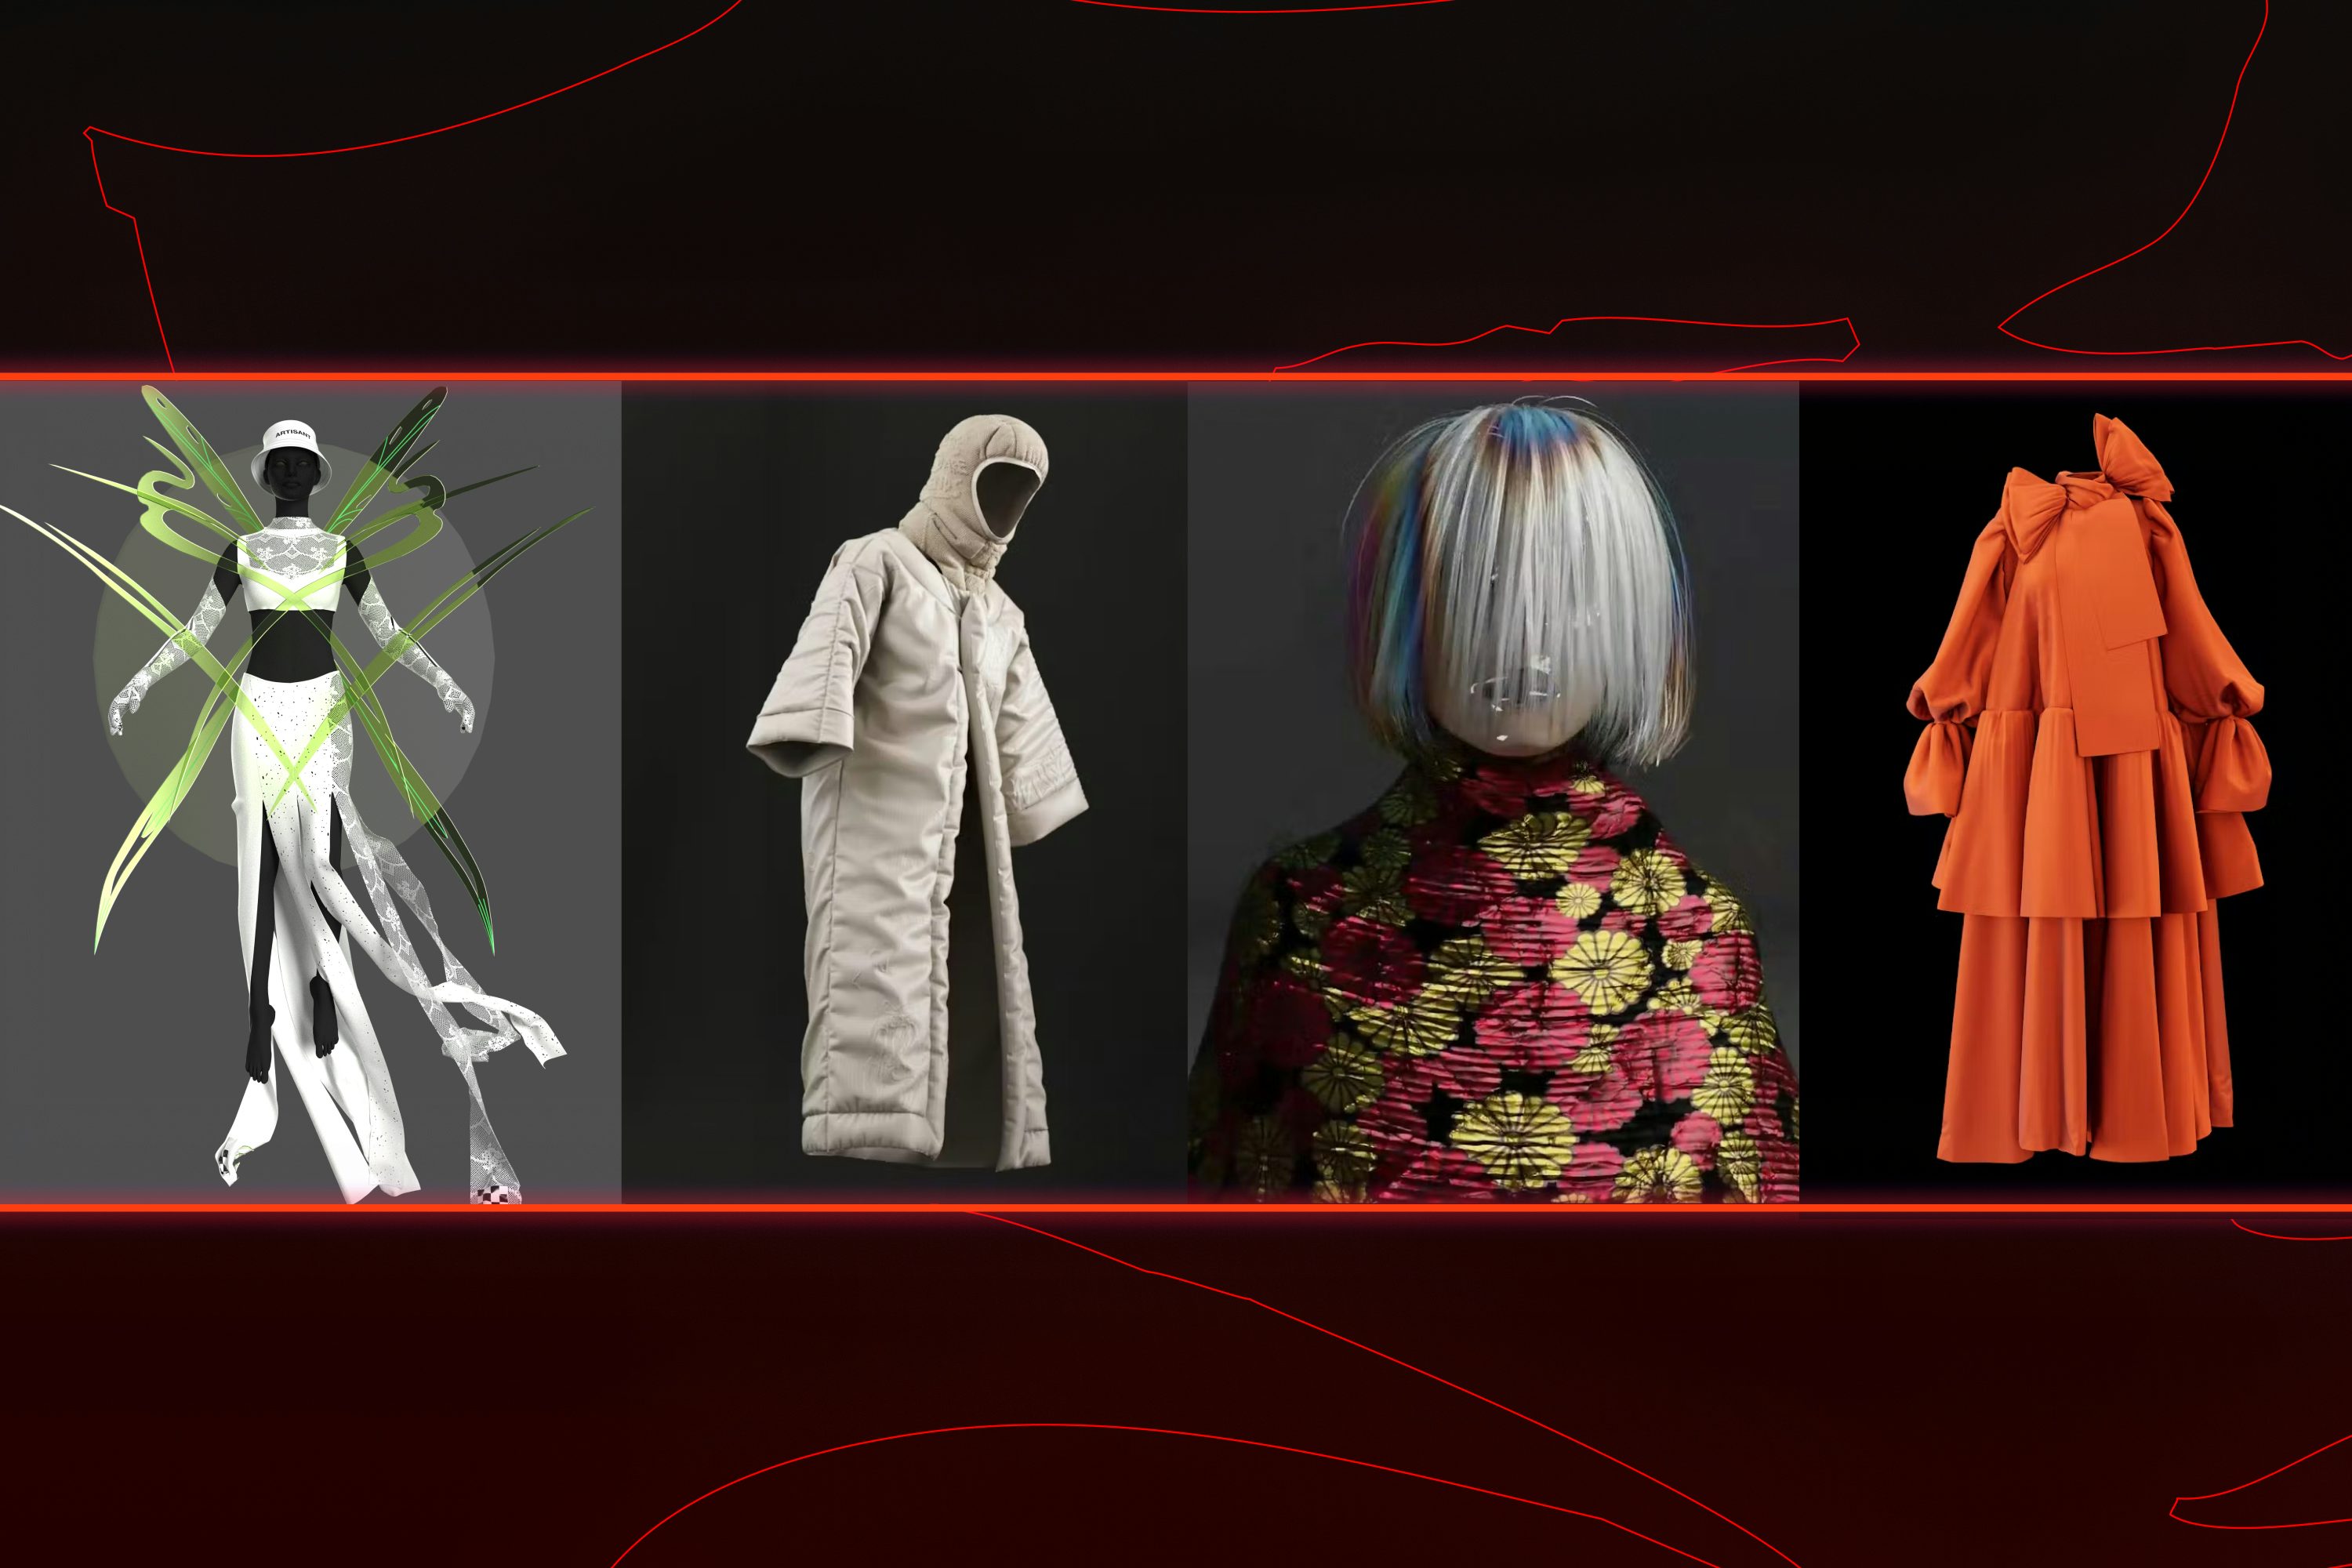 Digital garments from Red's collection